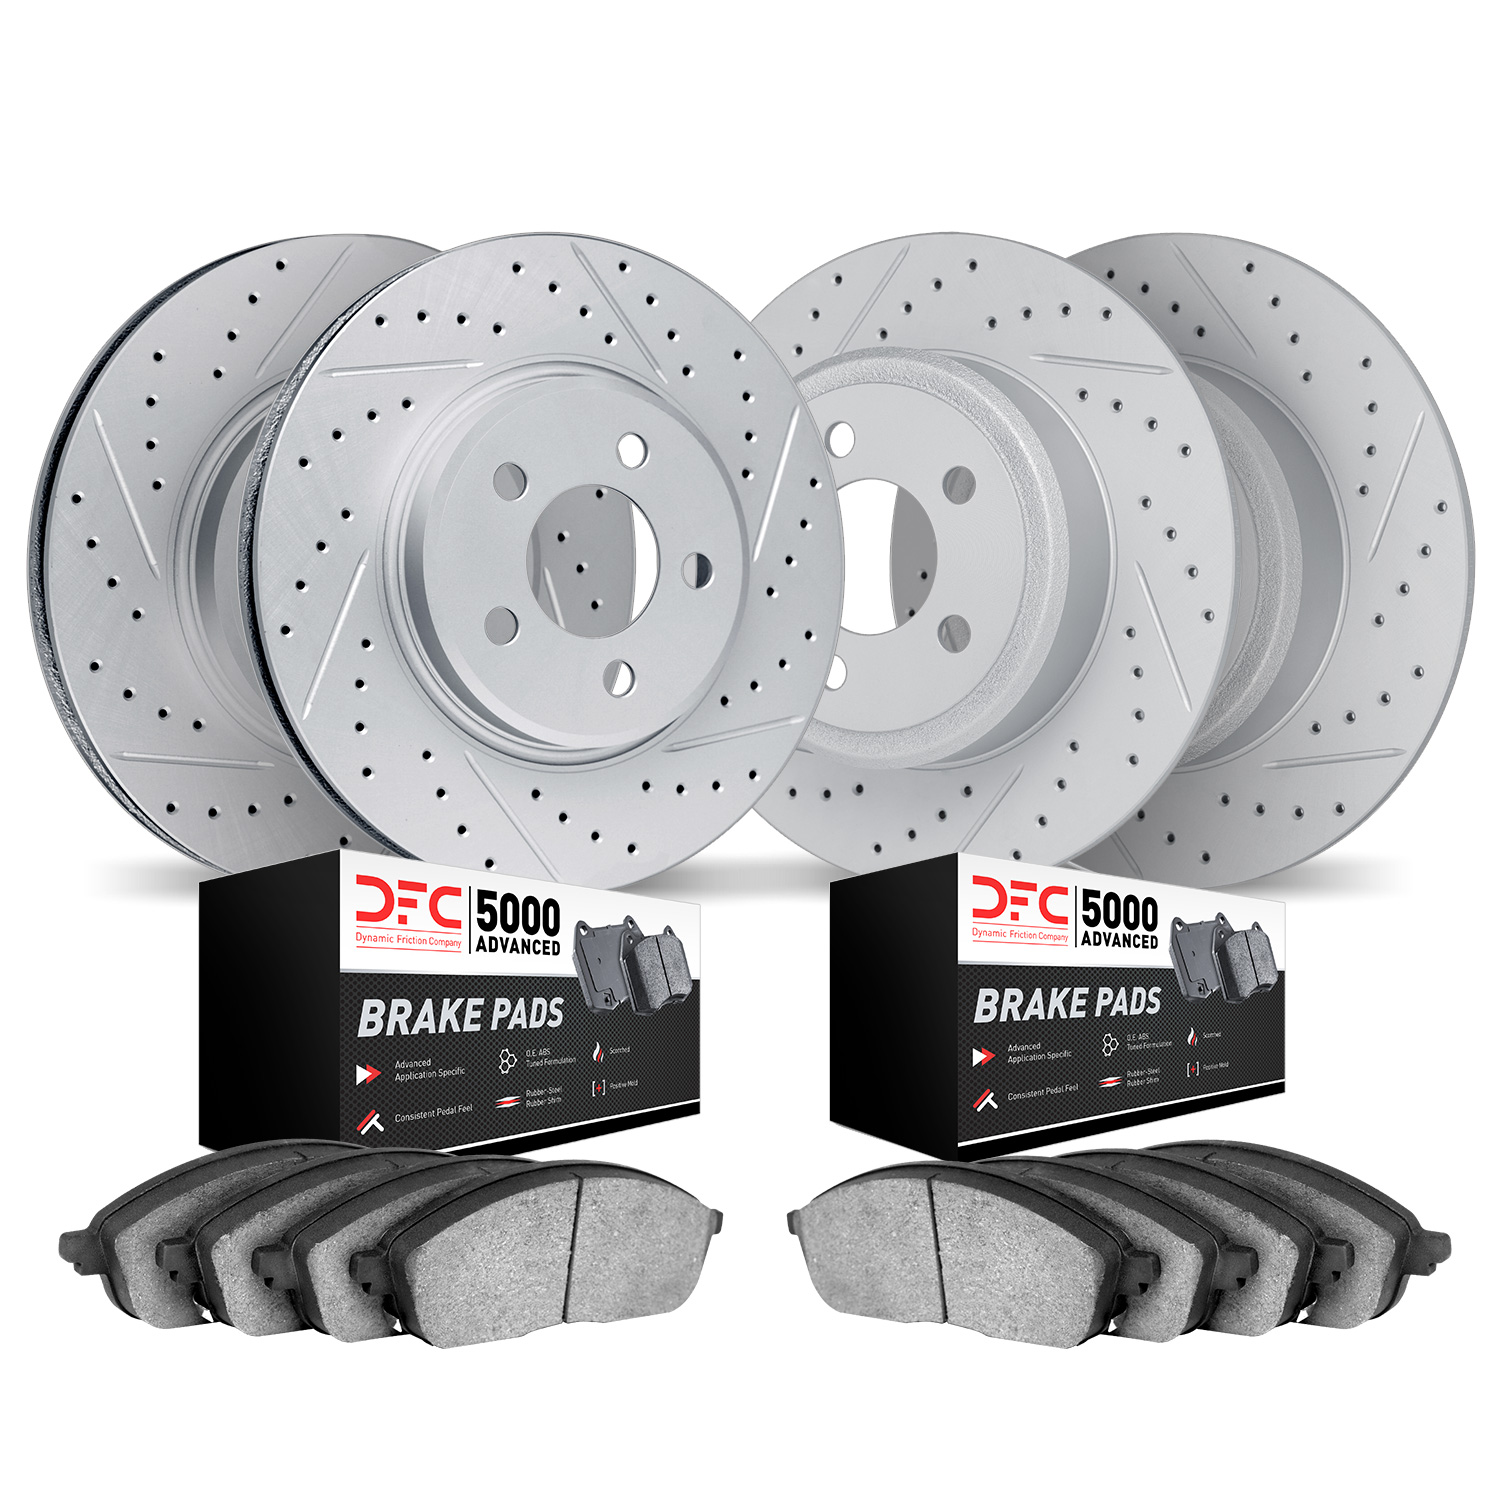 2504-76103 Geoperformance Drilled/Slotted Rotors w/5000 Advanced Brake Pads Kit, 2004-2010 Lexus/Toyota/Scion, Position: Front a